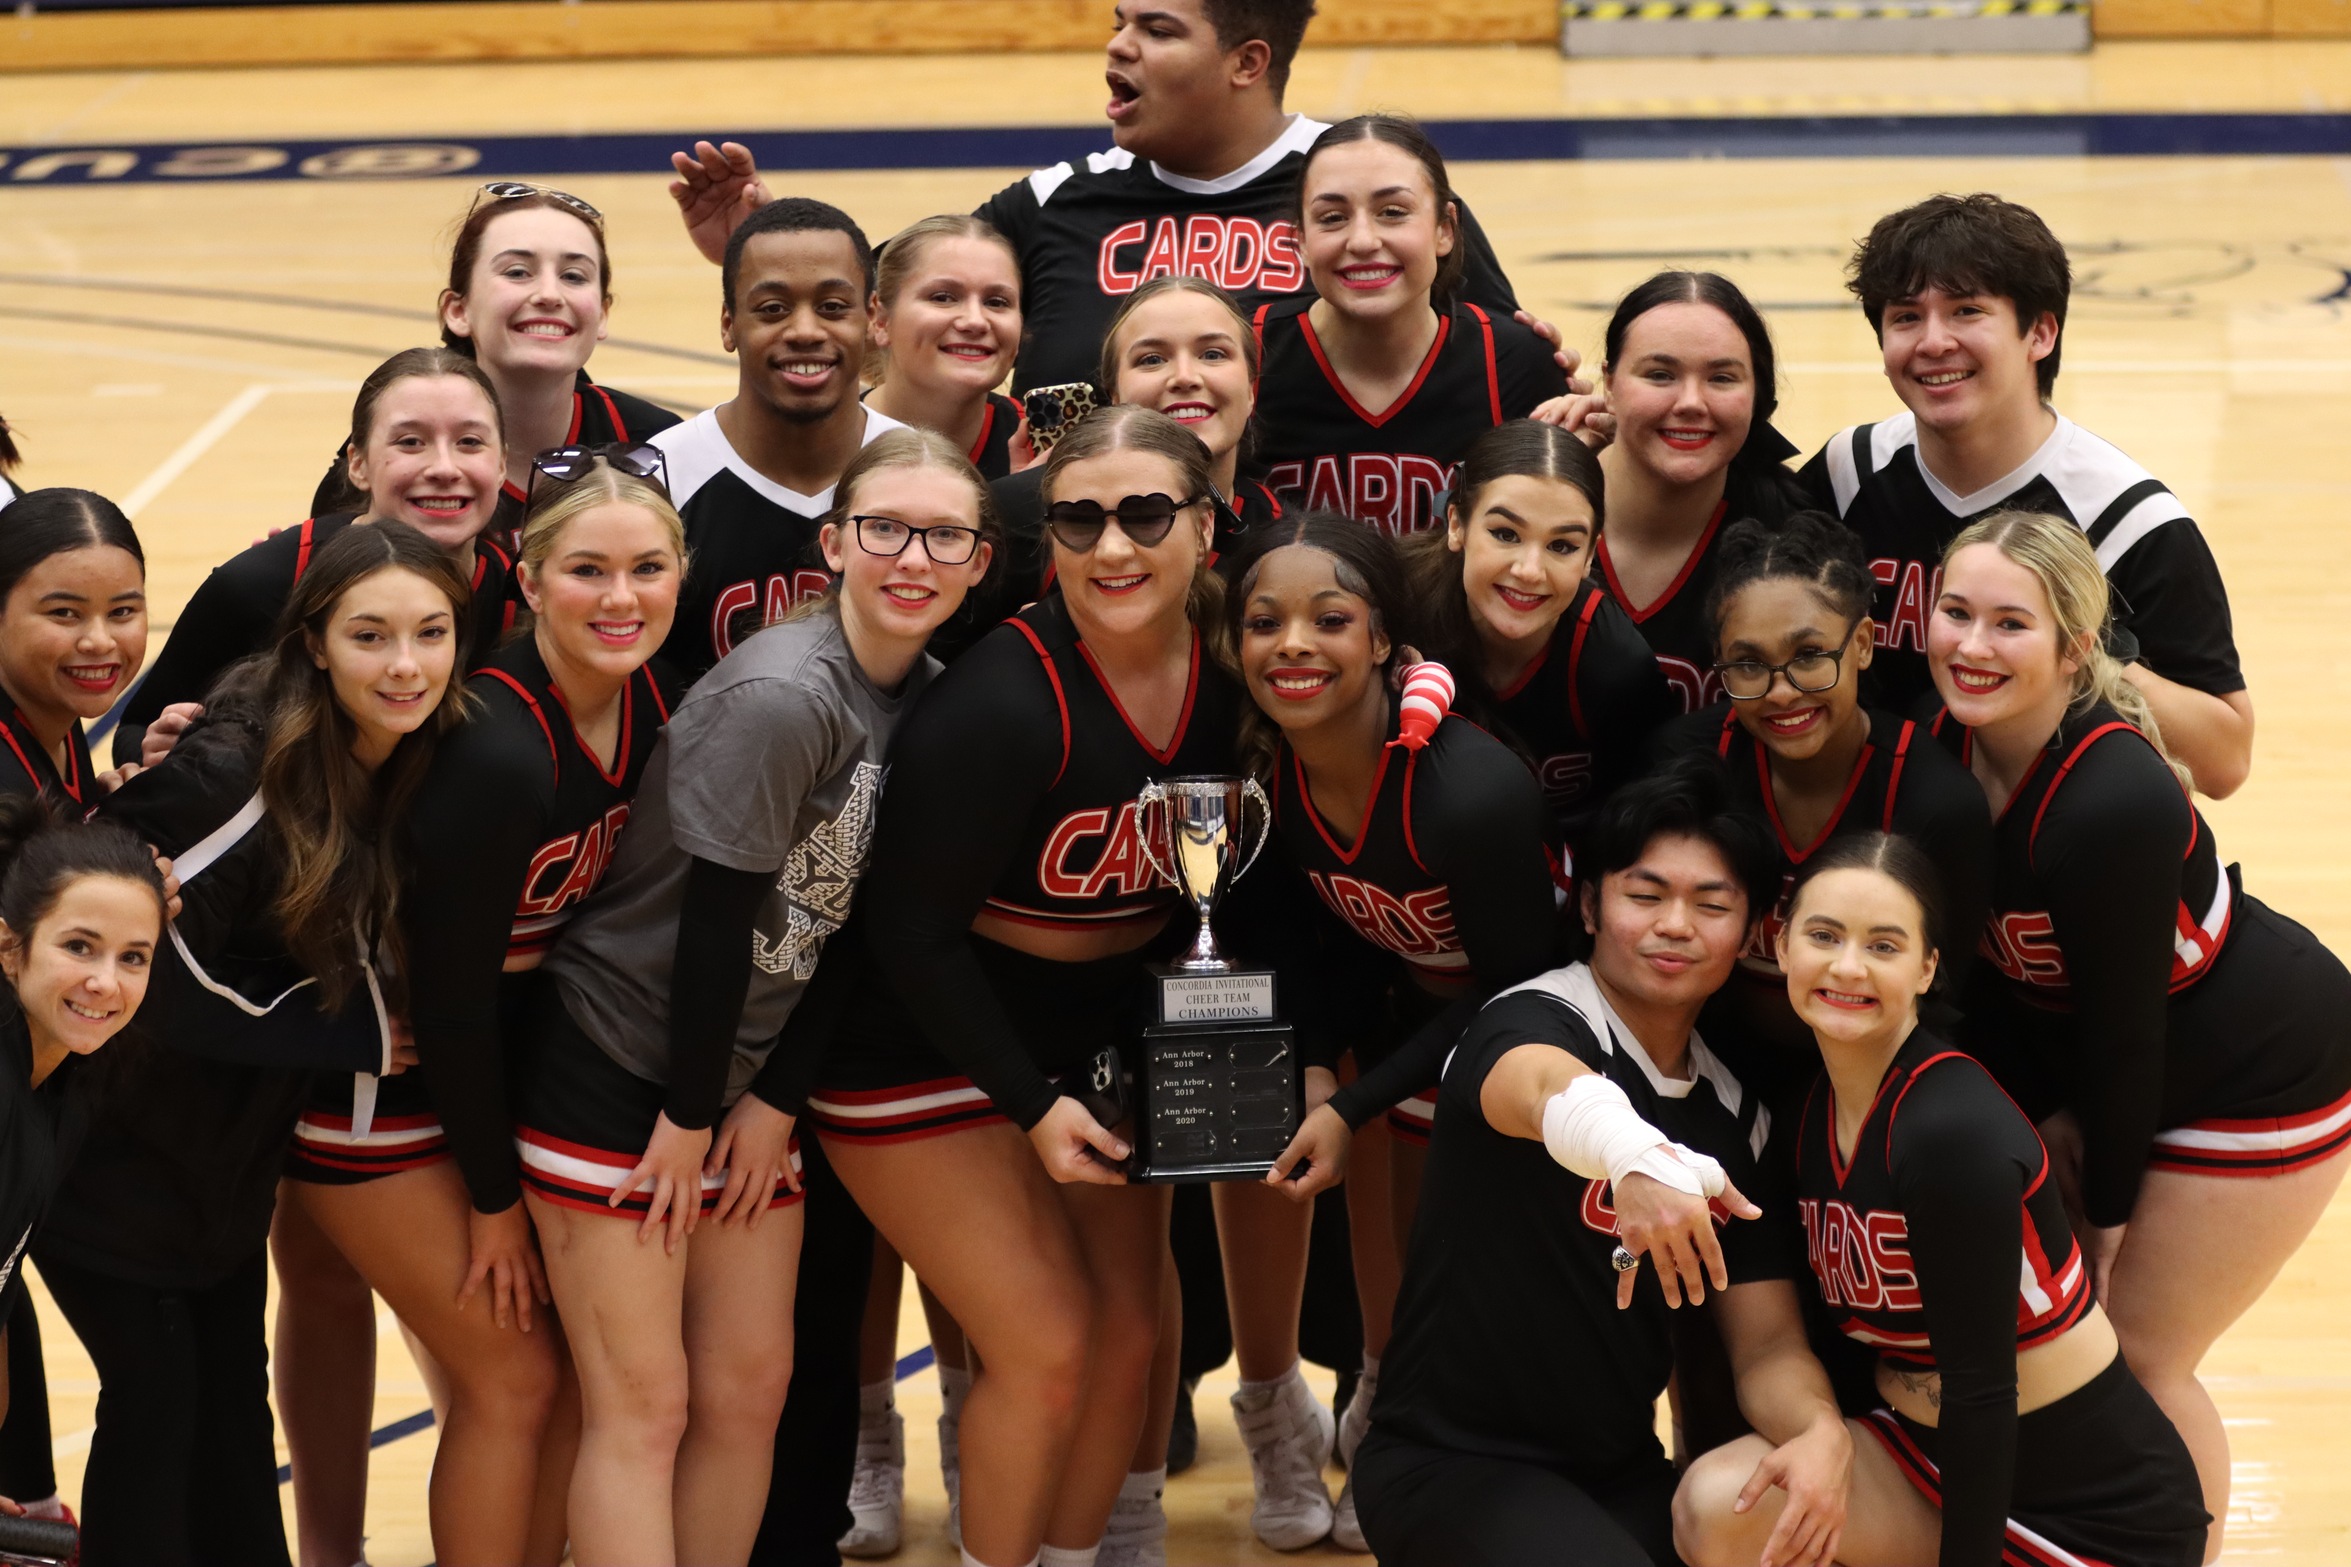 Cheer wins 4th consecutive CIT title